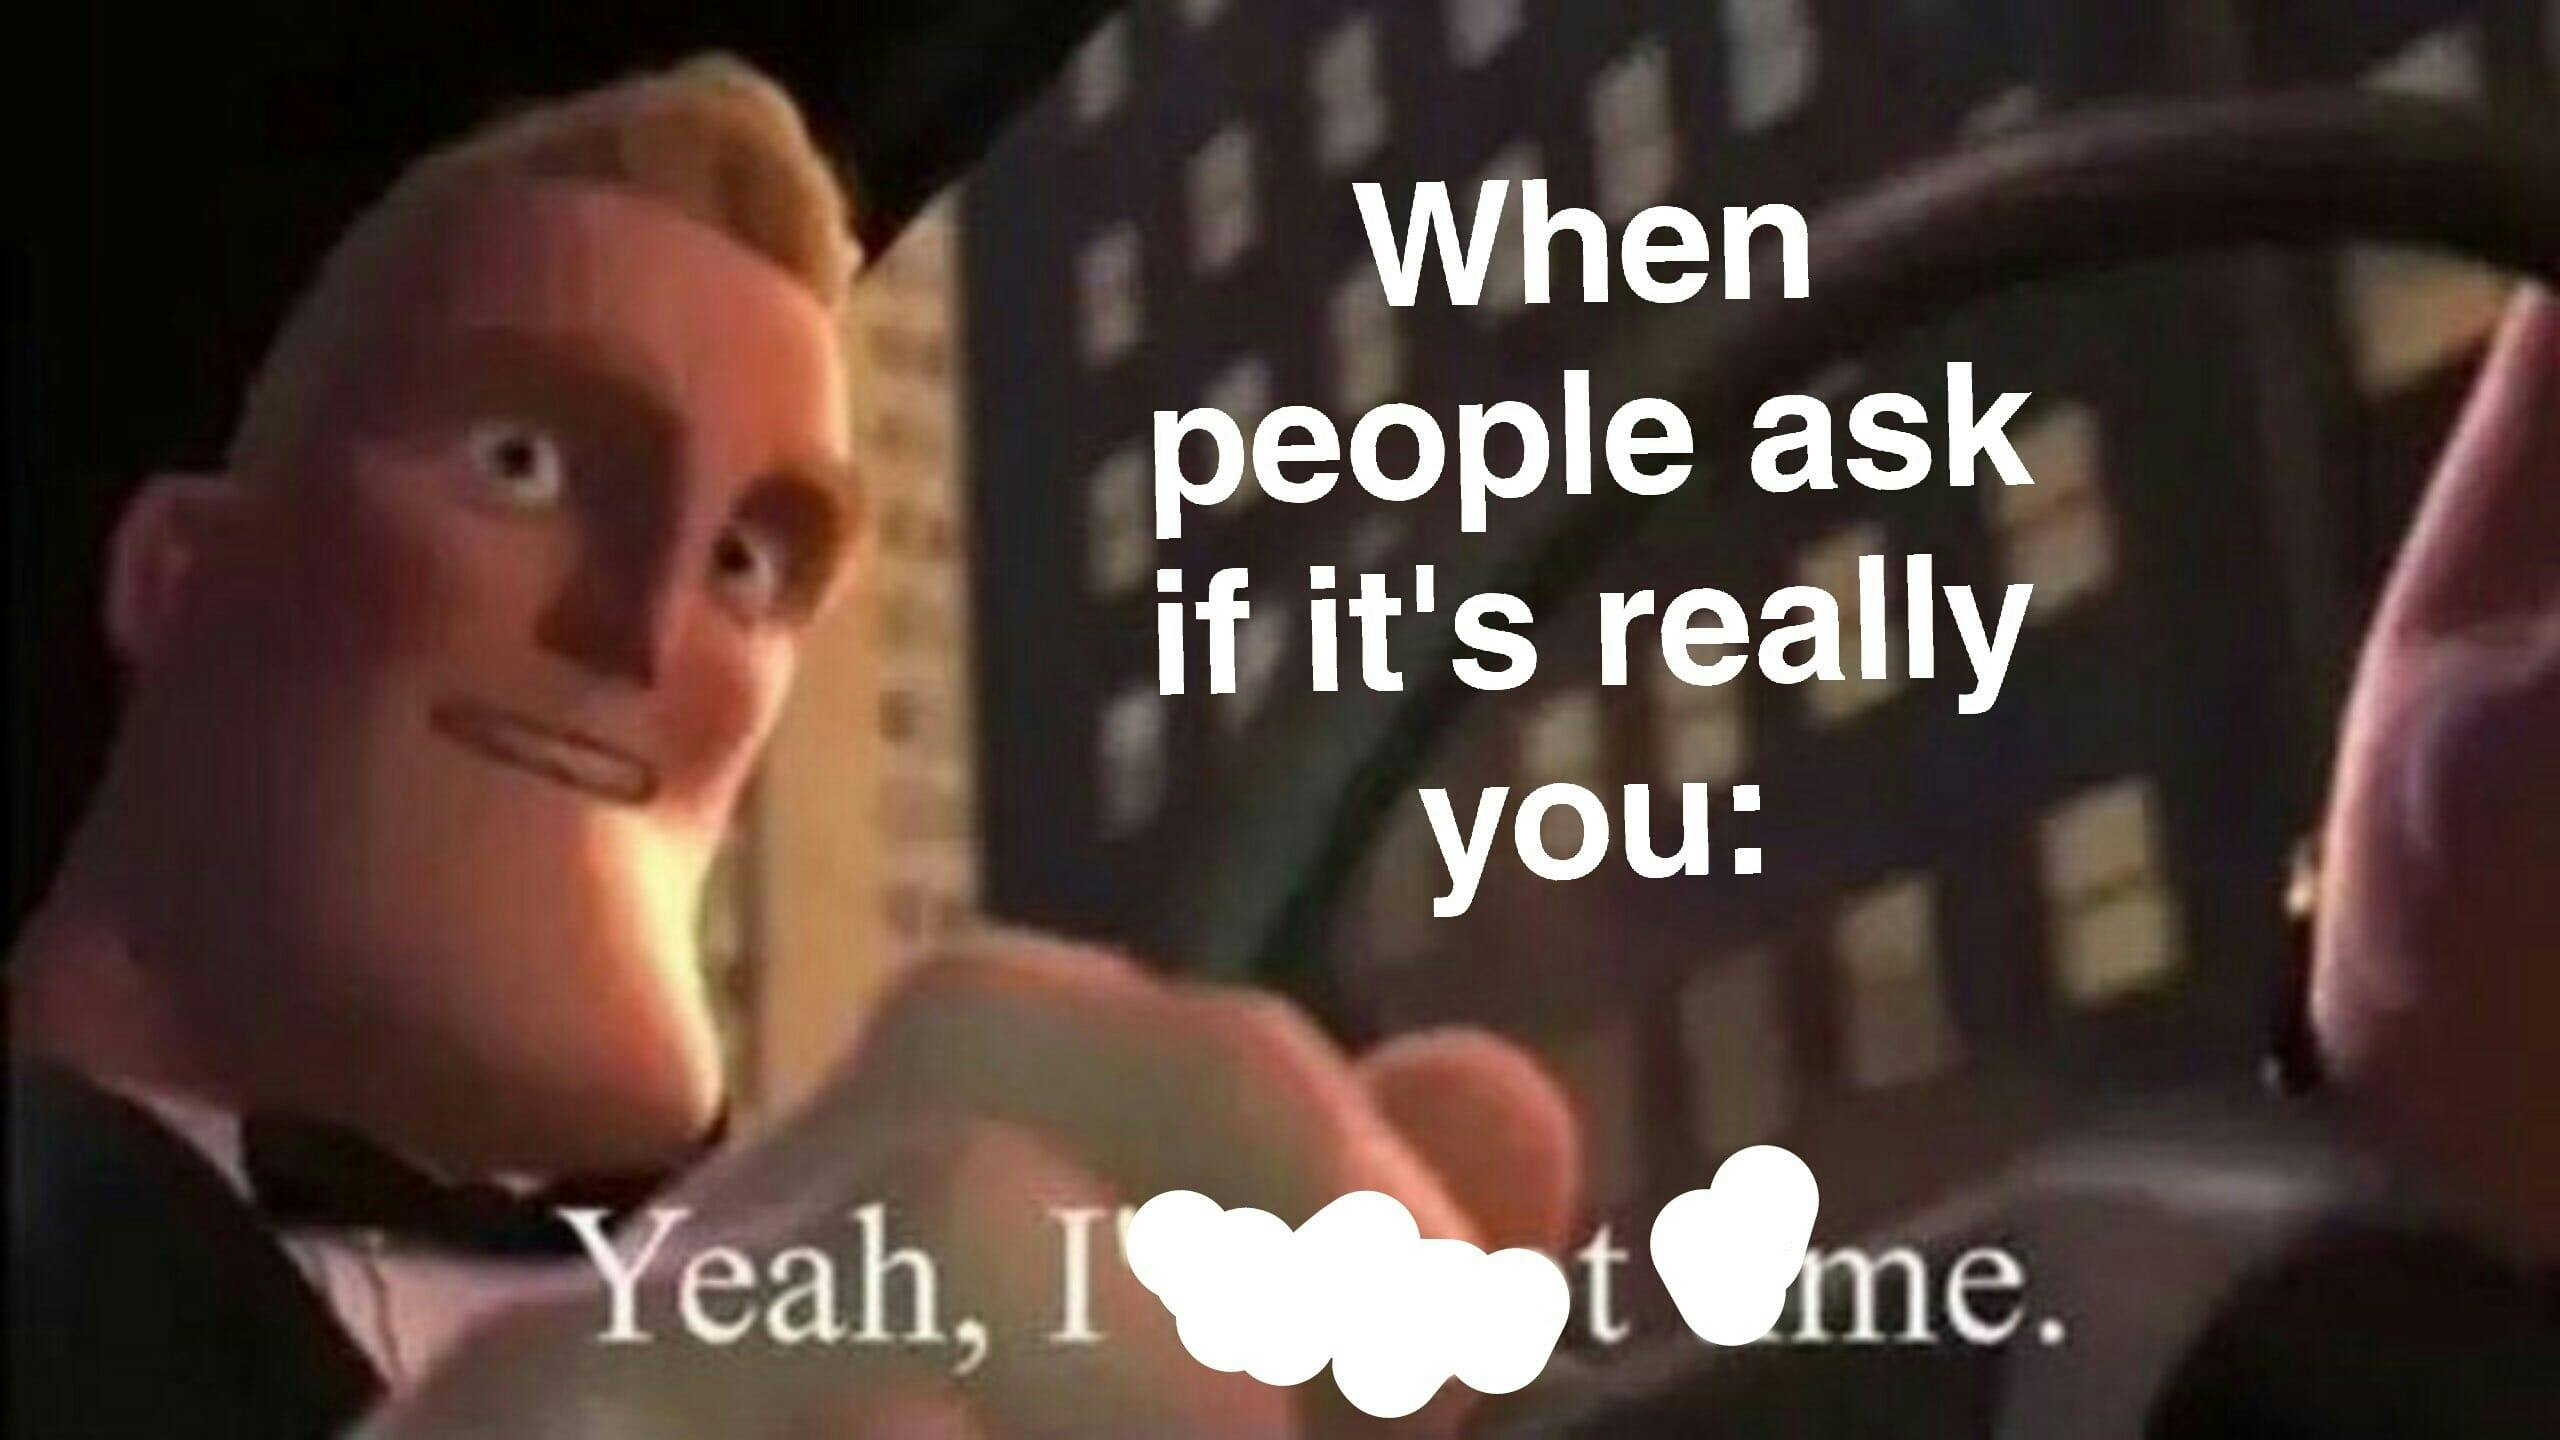 I've Got Time Meme: Dad From 'The Incredibles' Becomes Meme